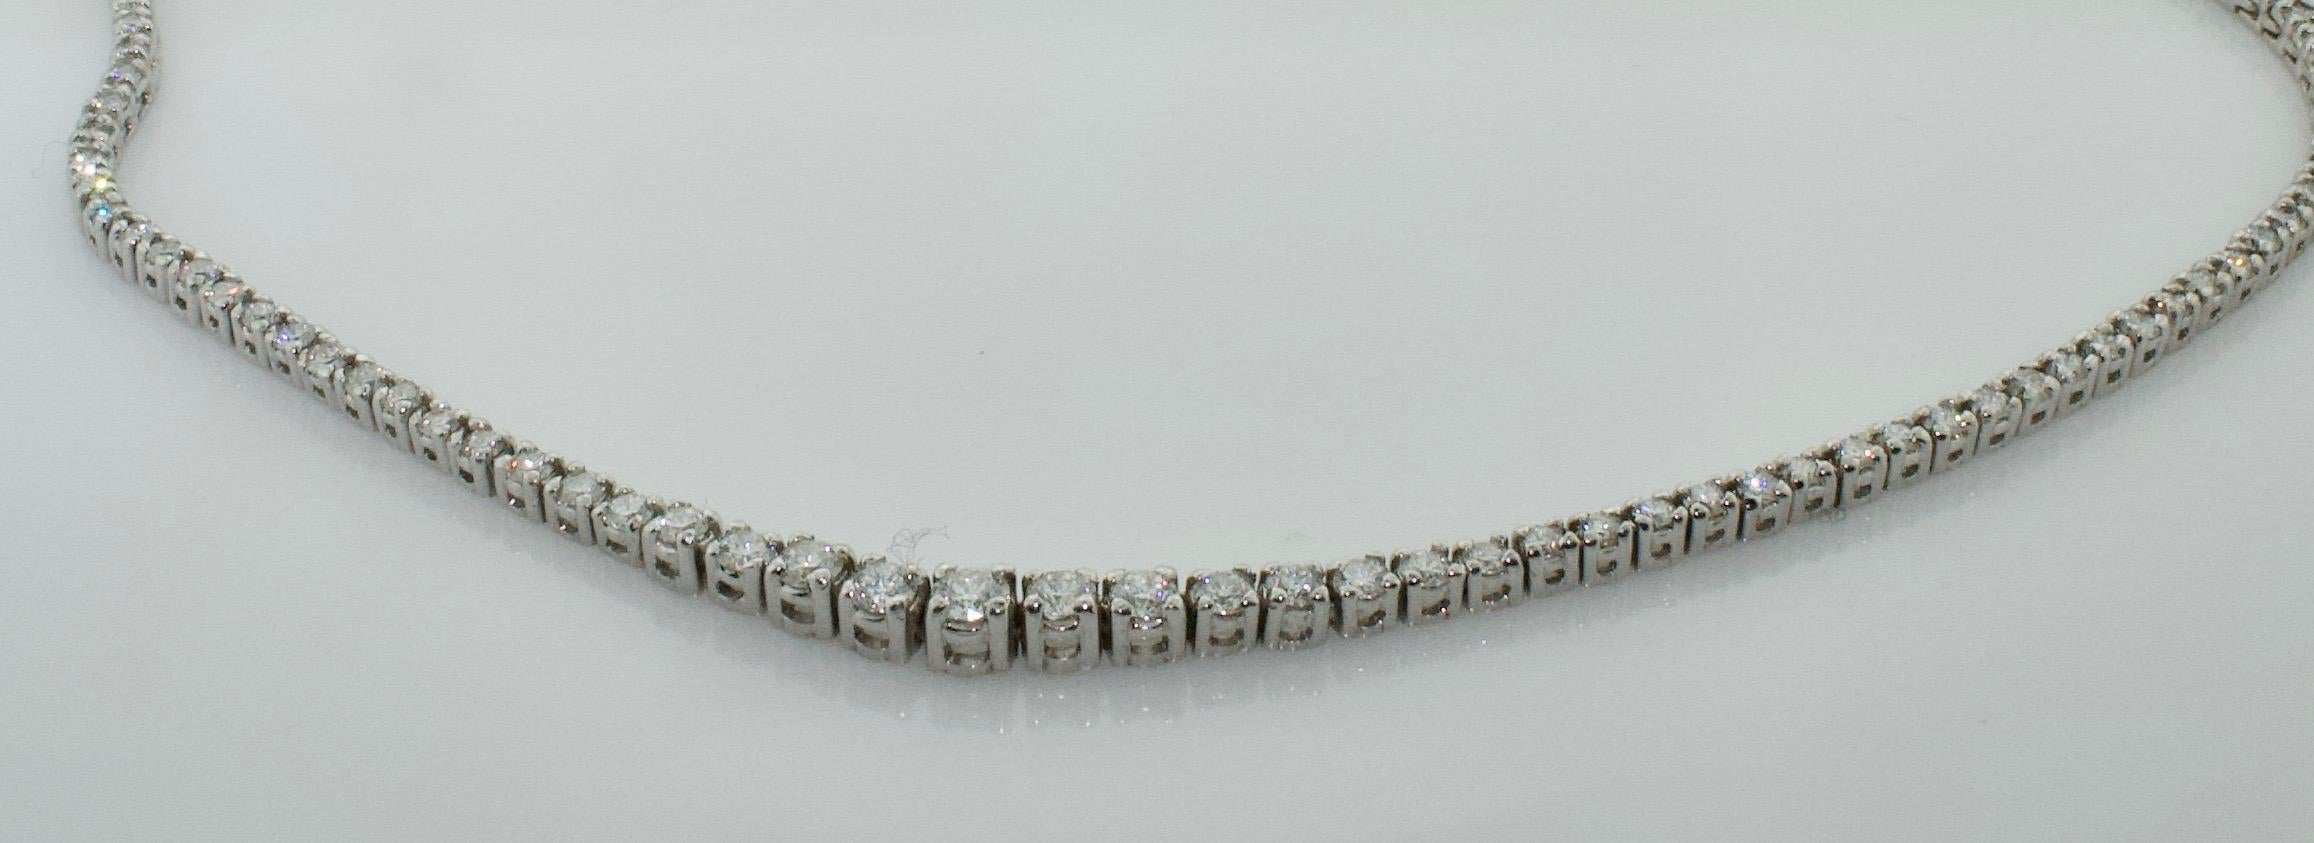 Straight Line Rivie re Diamond Necklace 6.00 Carat in White Gold In New Condition For Sale In Wailea, HI